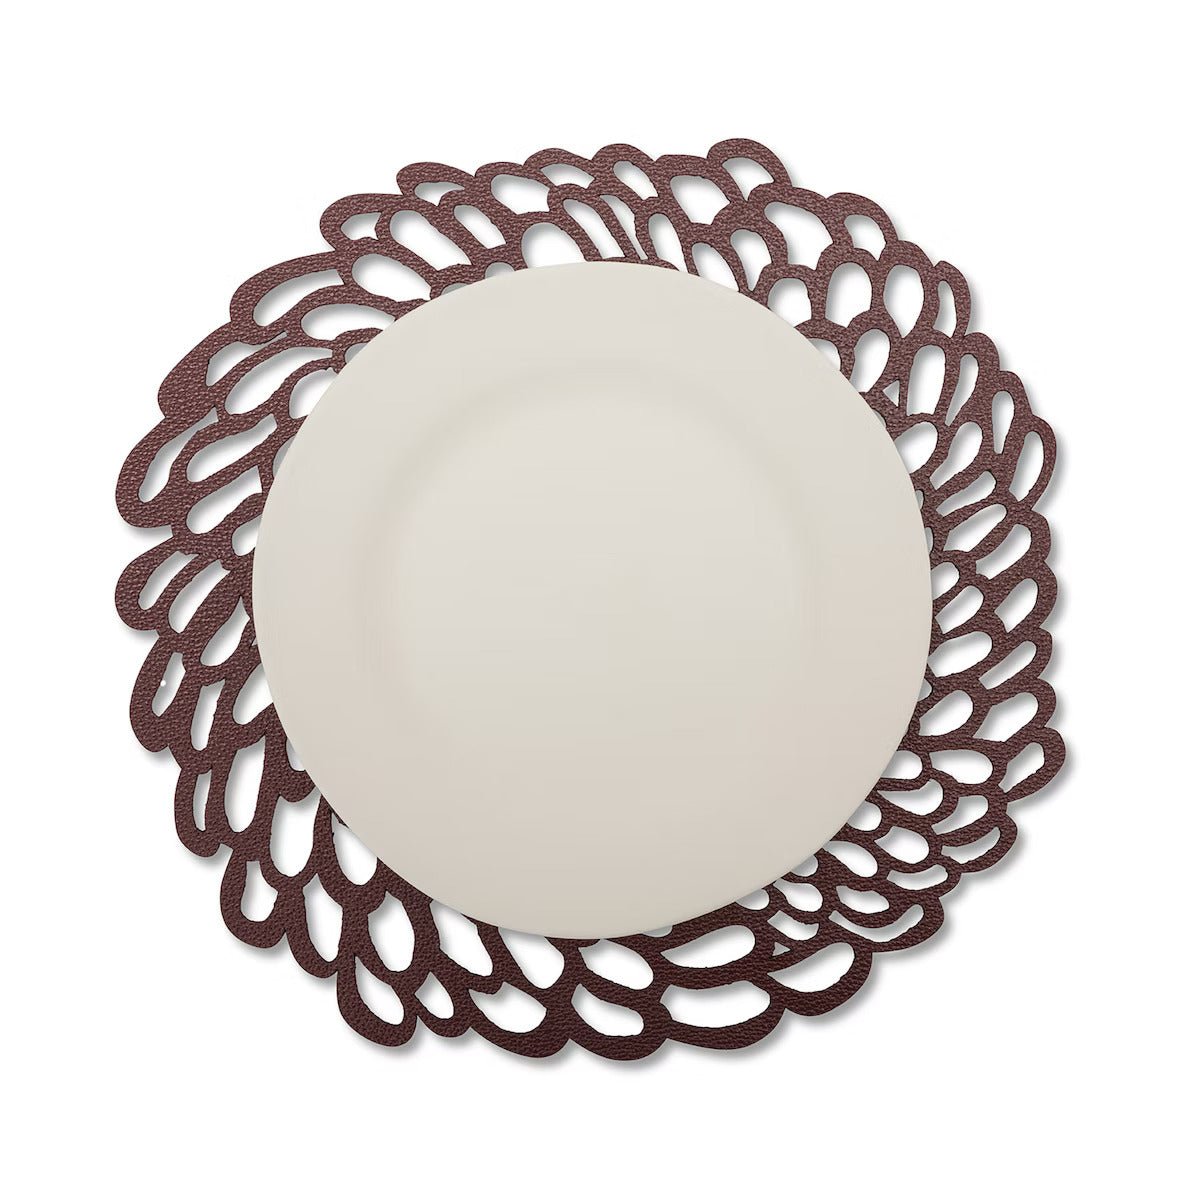 A lace effect washable paper circular placemat is shown in brown, under a white plate.